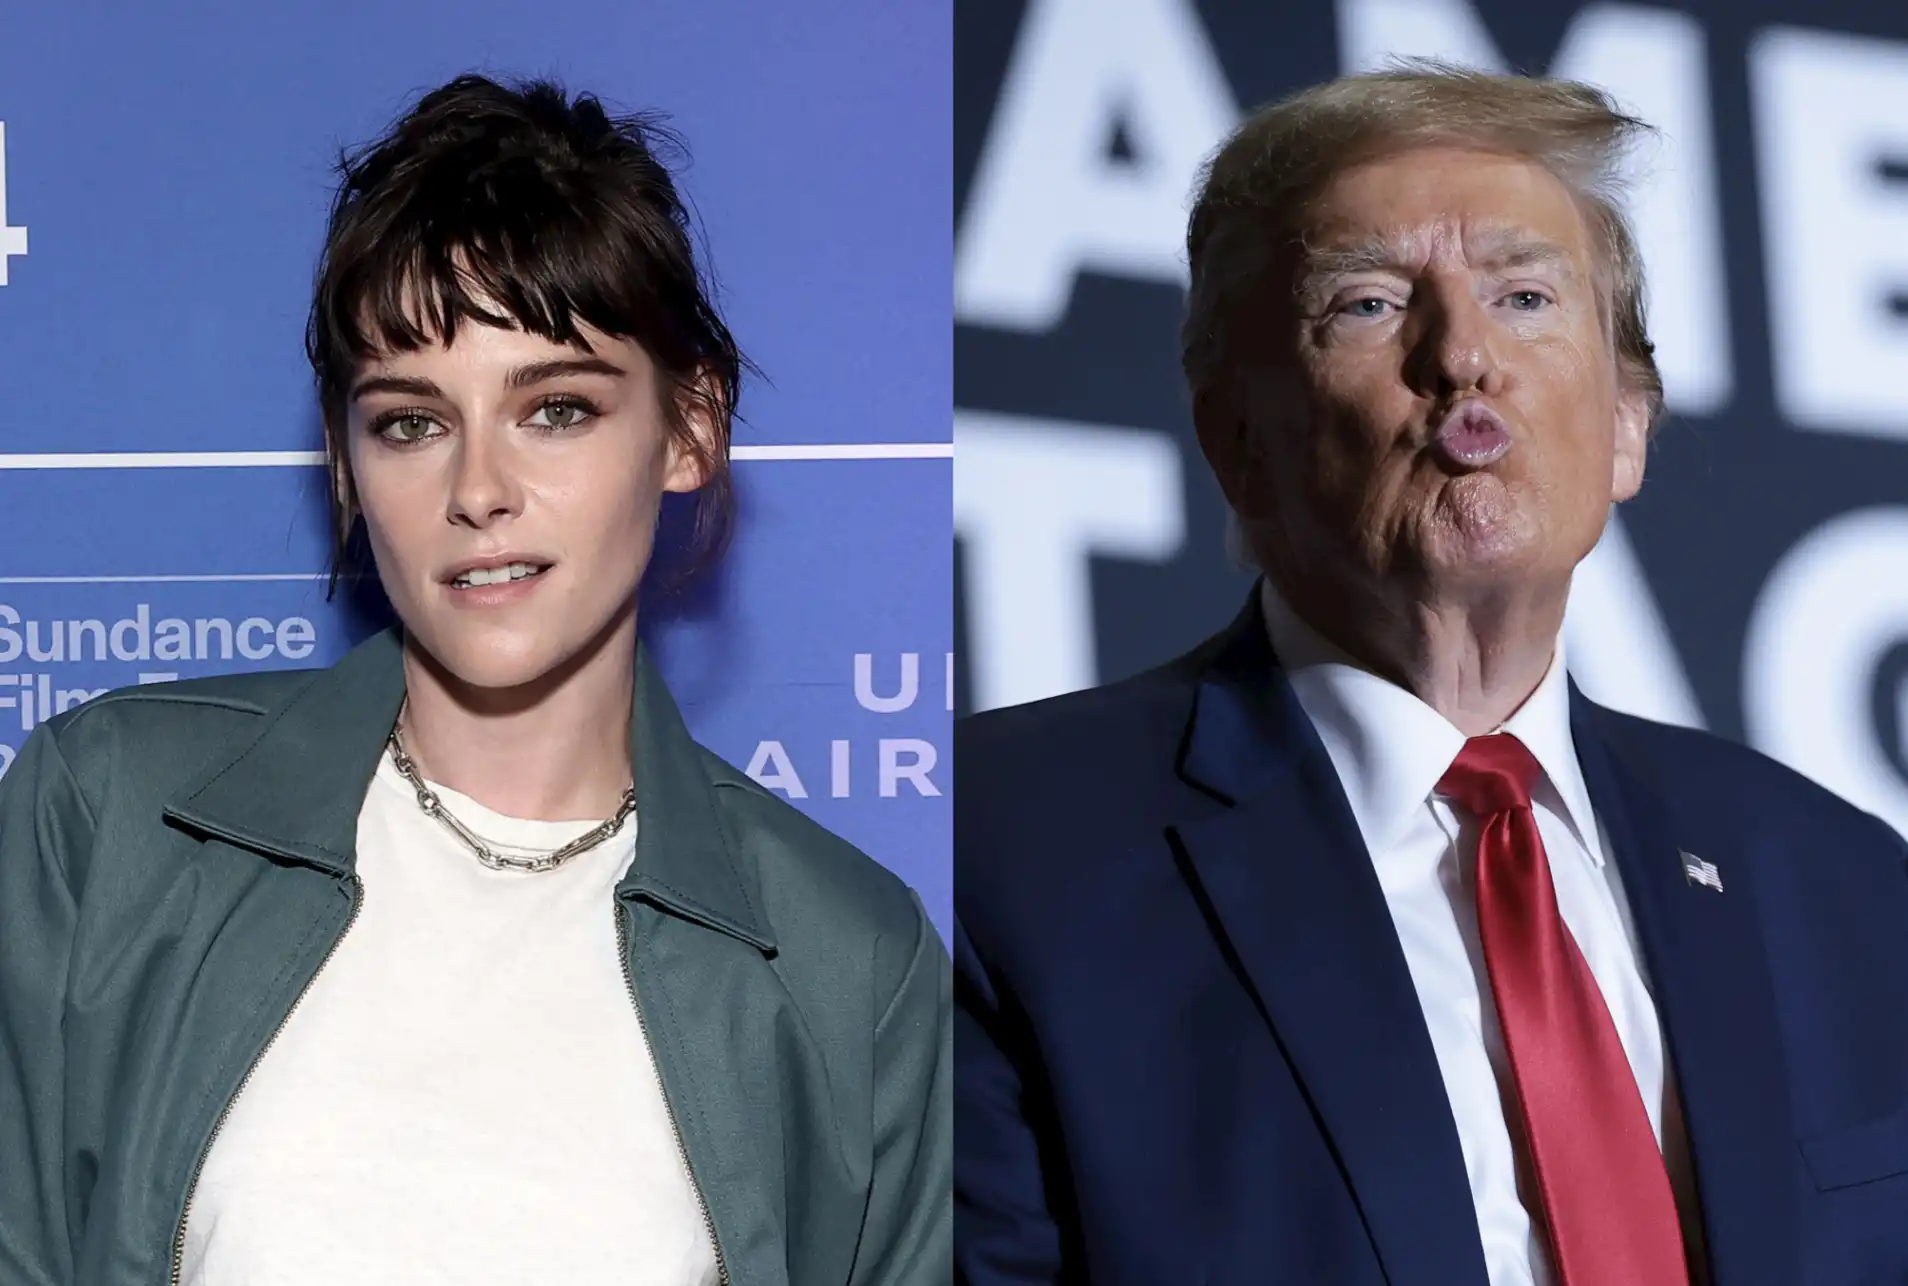 Kristen Stewart reveals inspiration from Donald Trump to come out